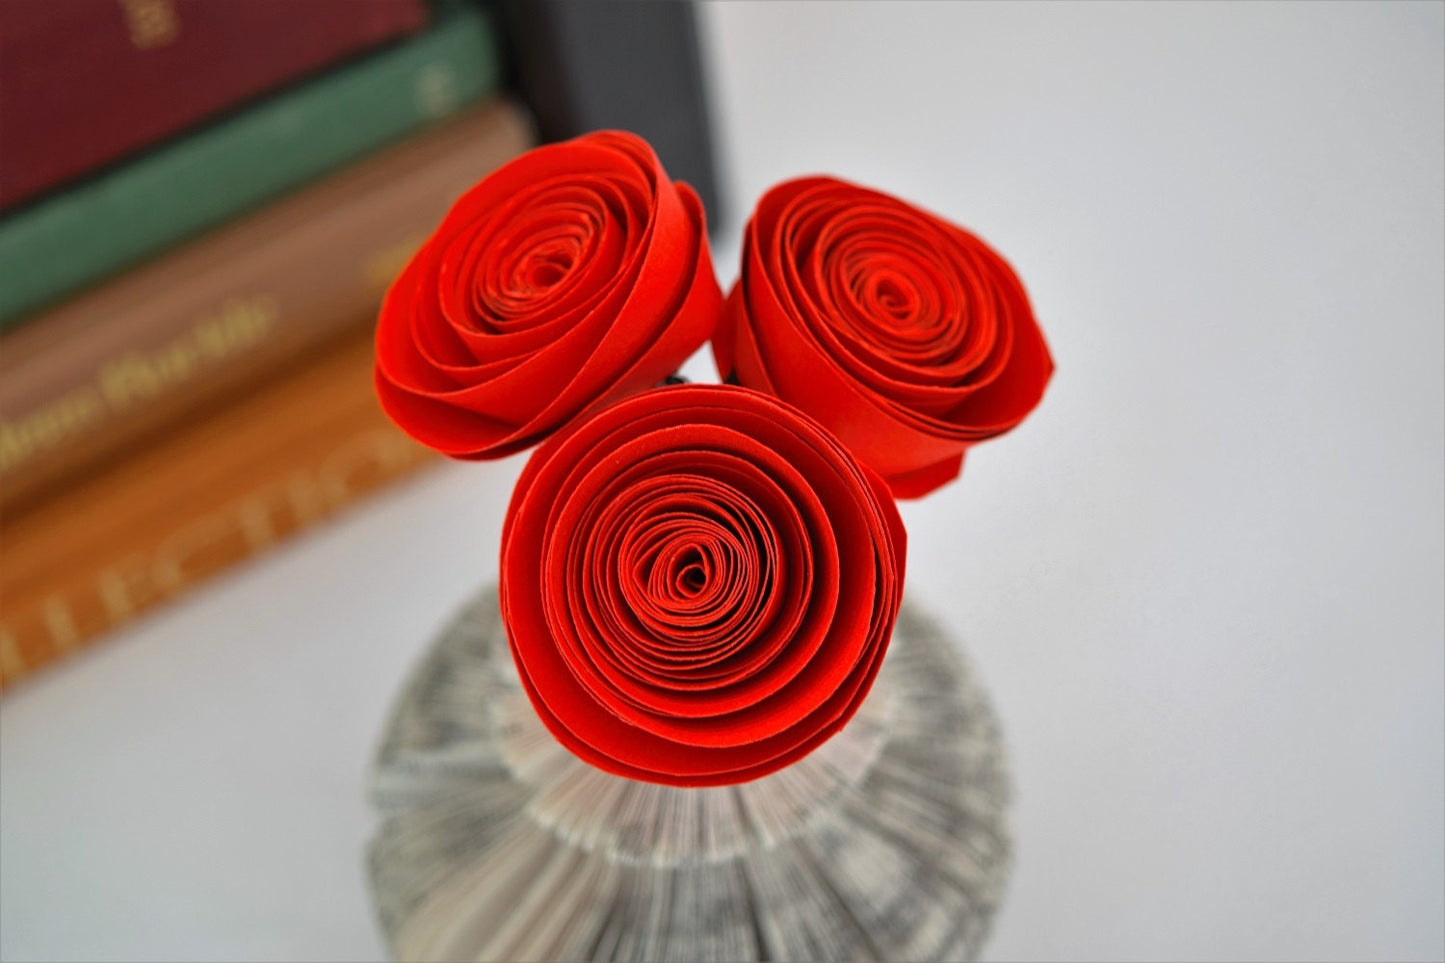 Vase and Red Roses Book Gift